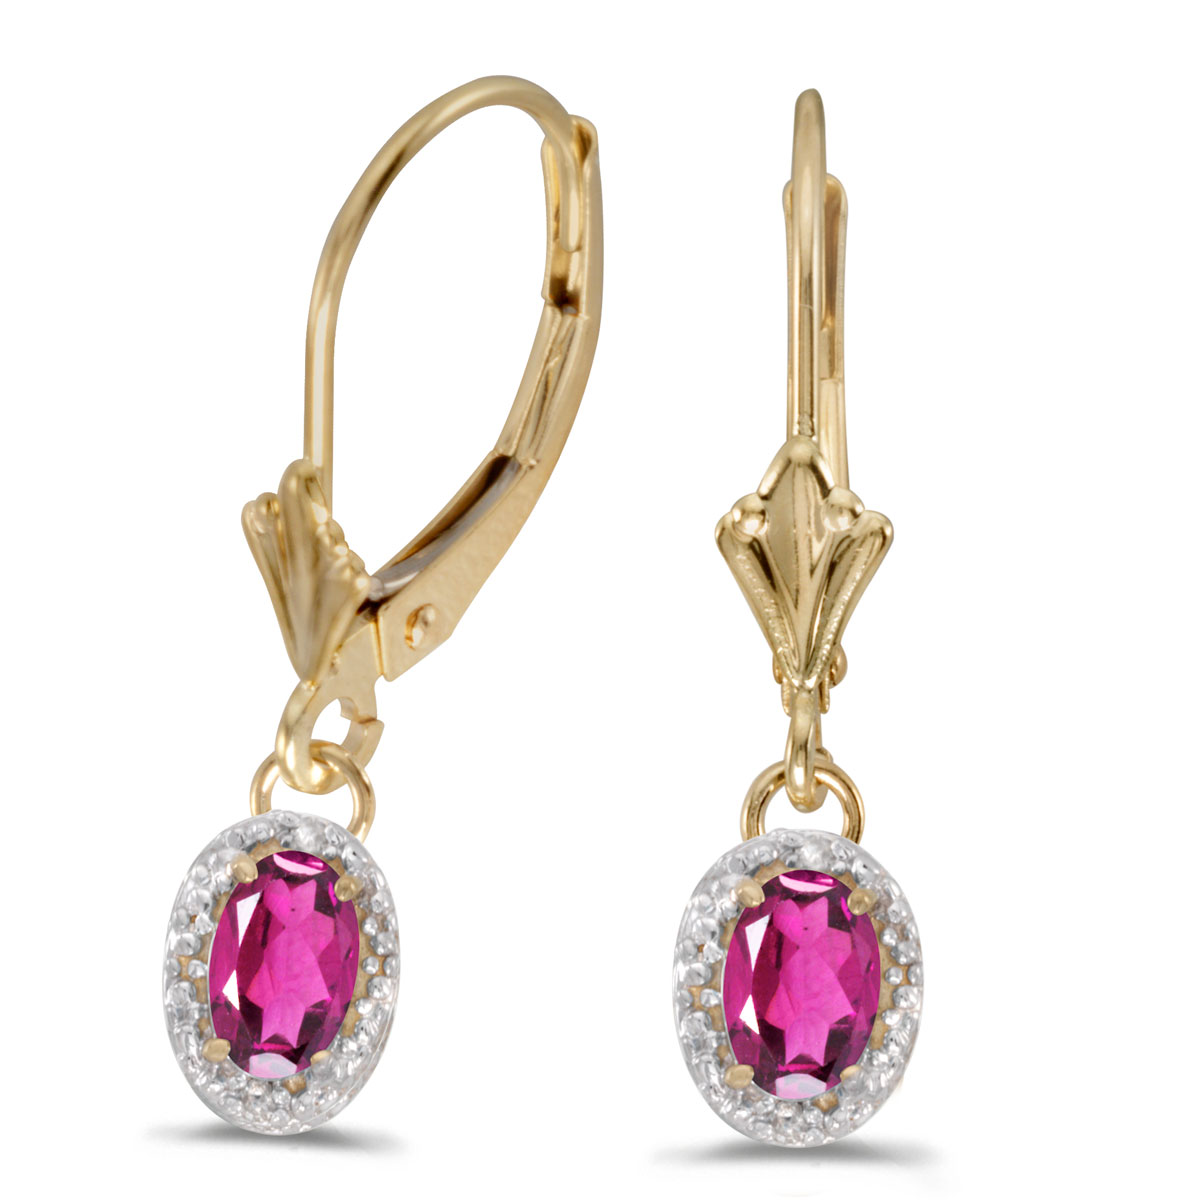 Beautiful 10k yellow gold leverback earrings with pretty 6x4 mm pink topaz stones complemented wi...